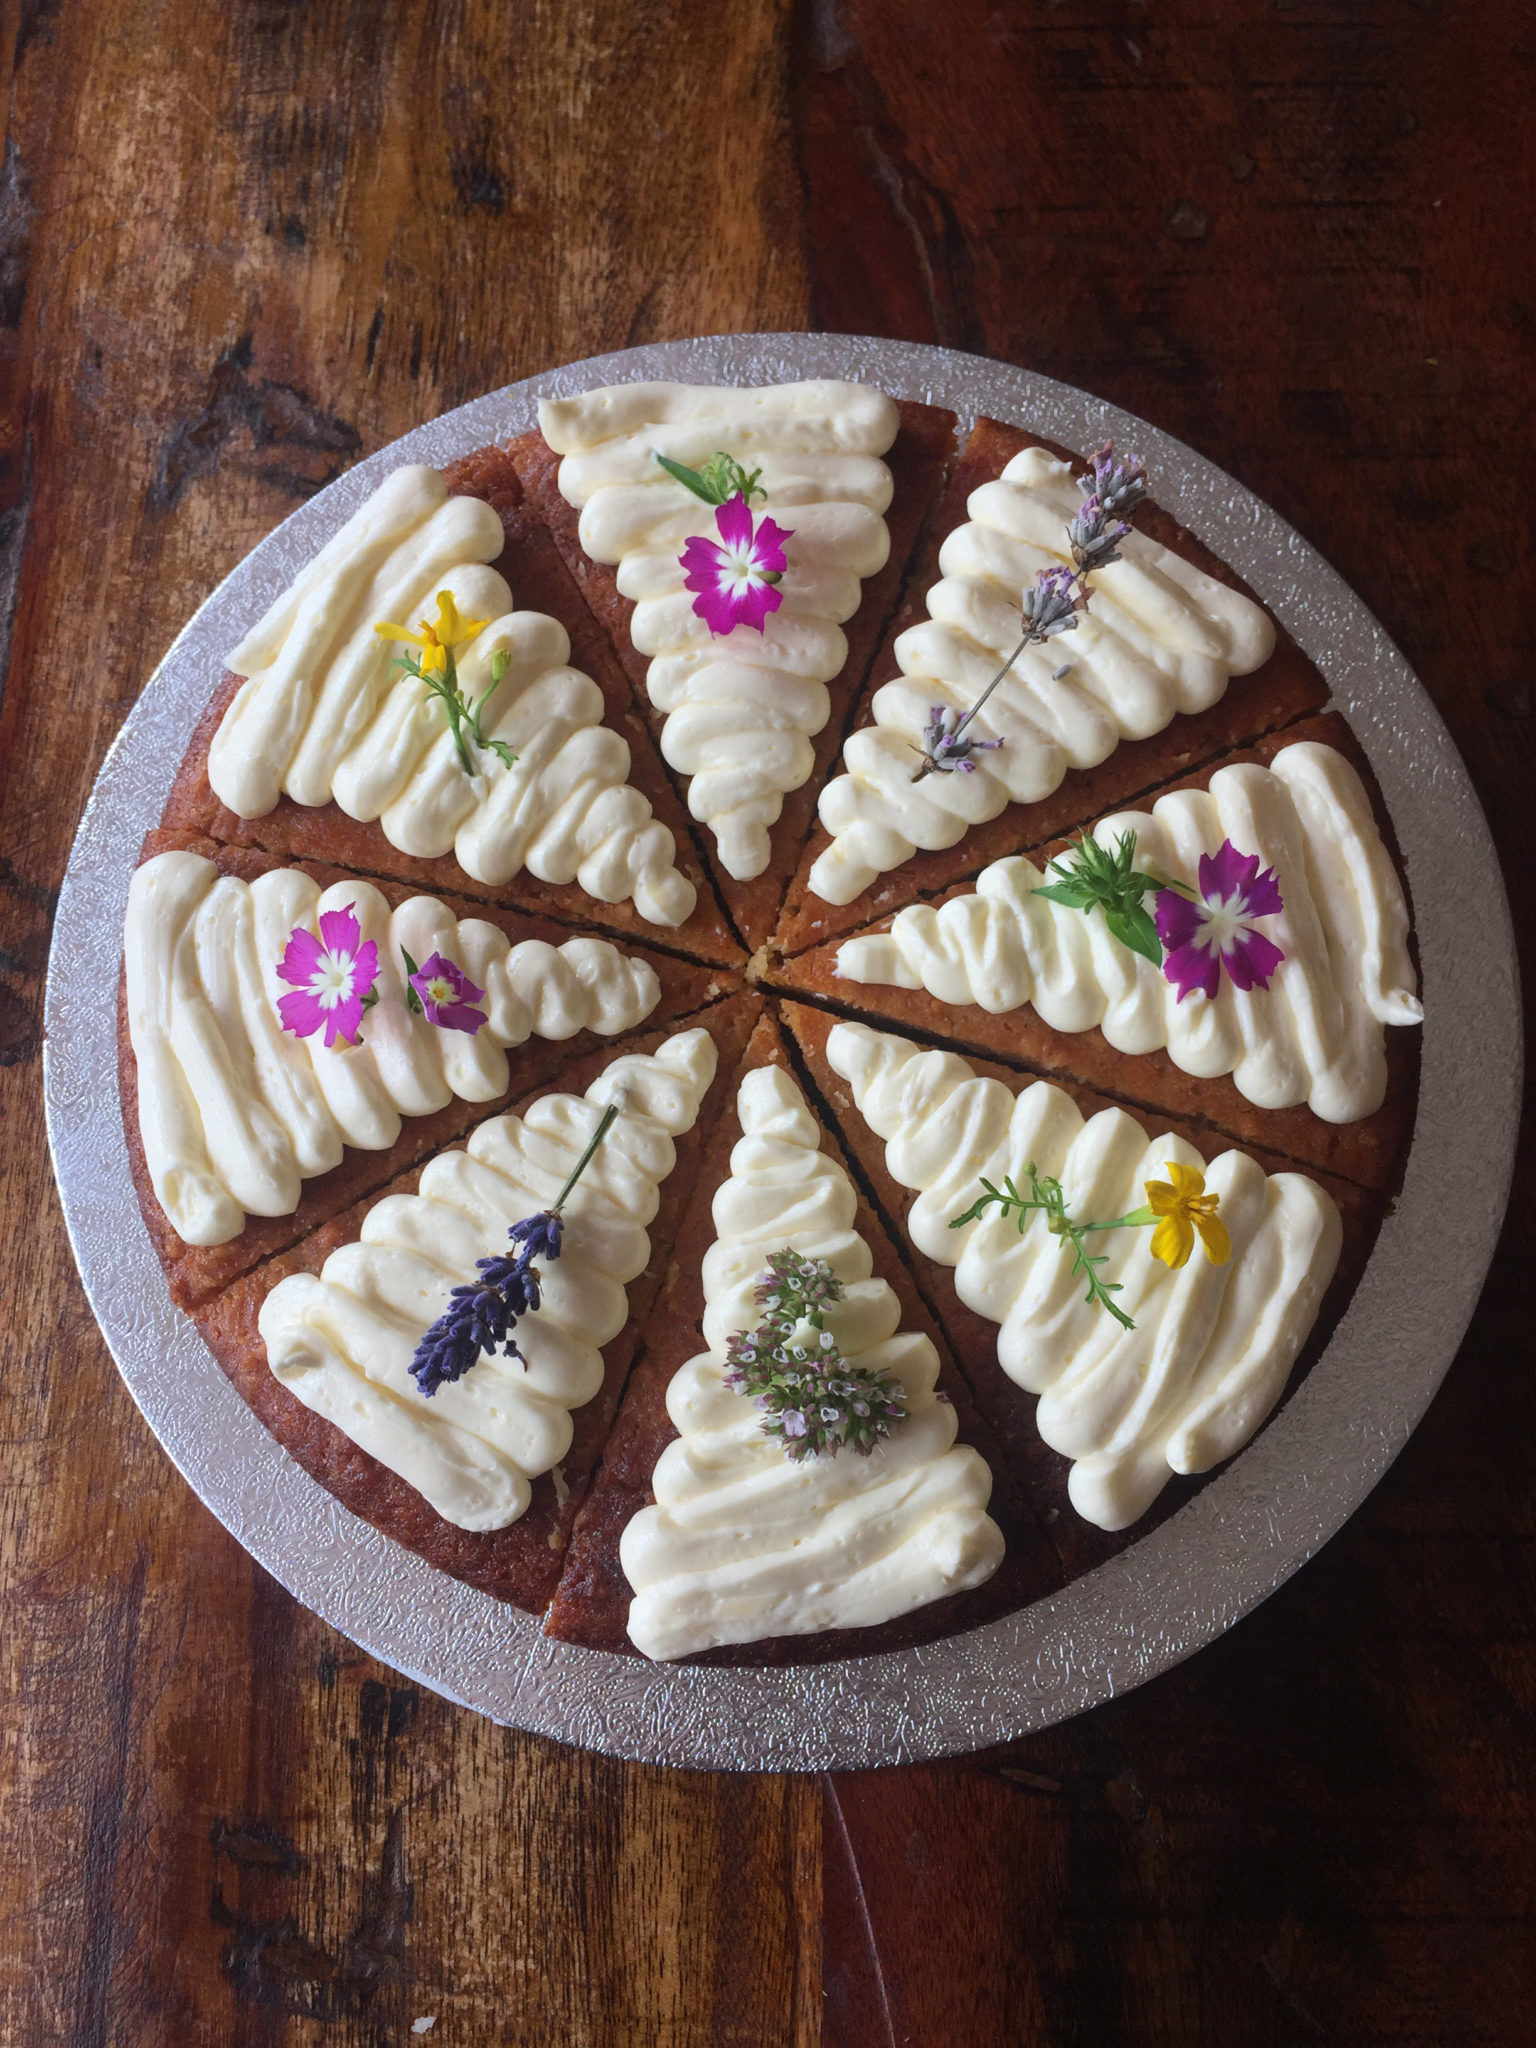 carrot cake...slice version, finished with edible organi flowers and buttercream swirls. perfect for pic nics and summer week ends